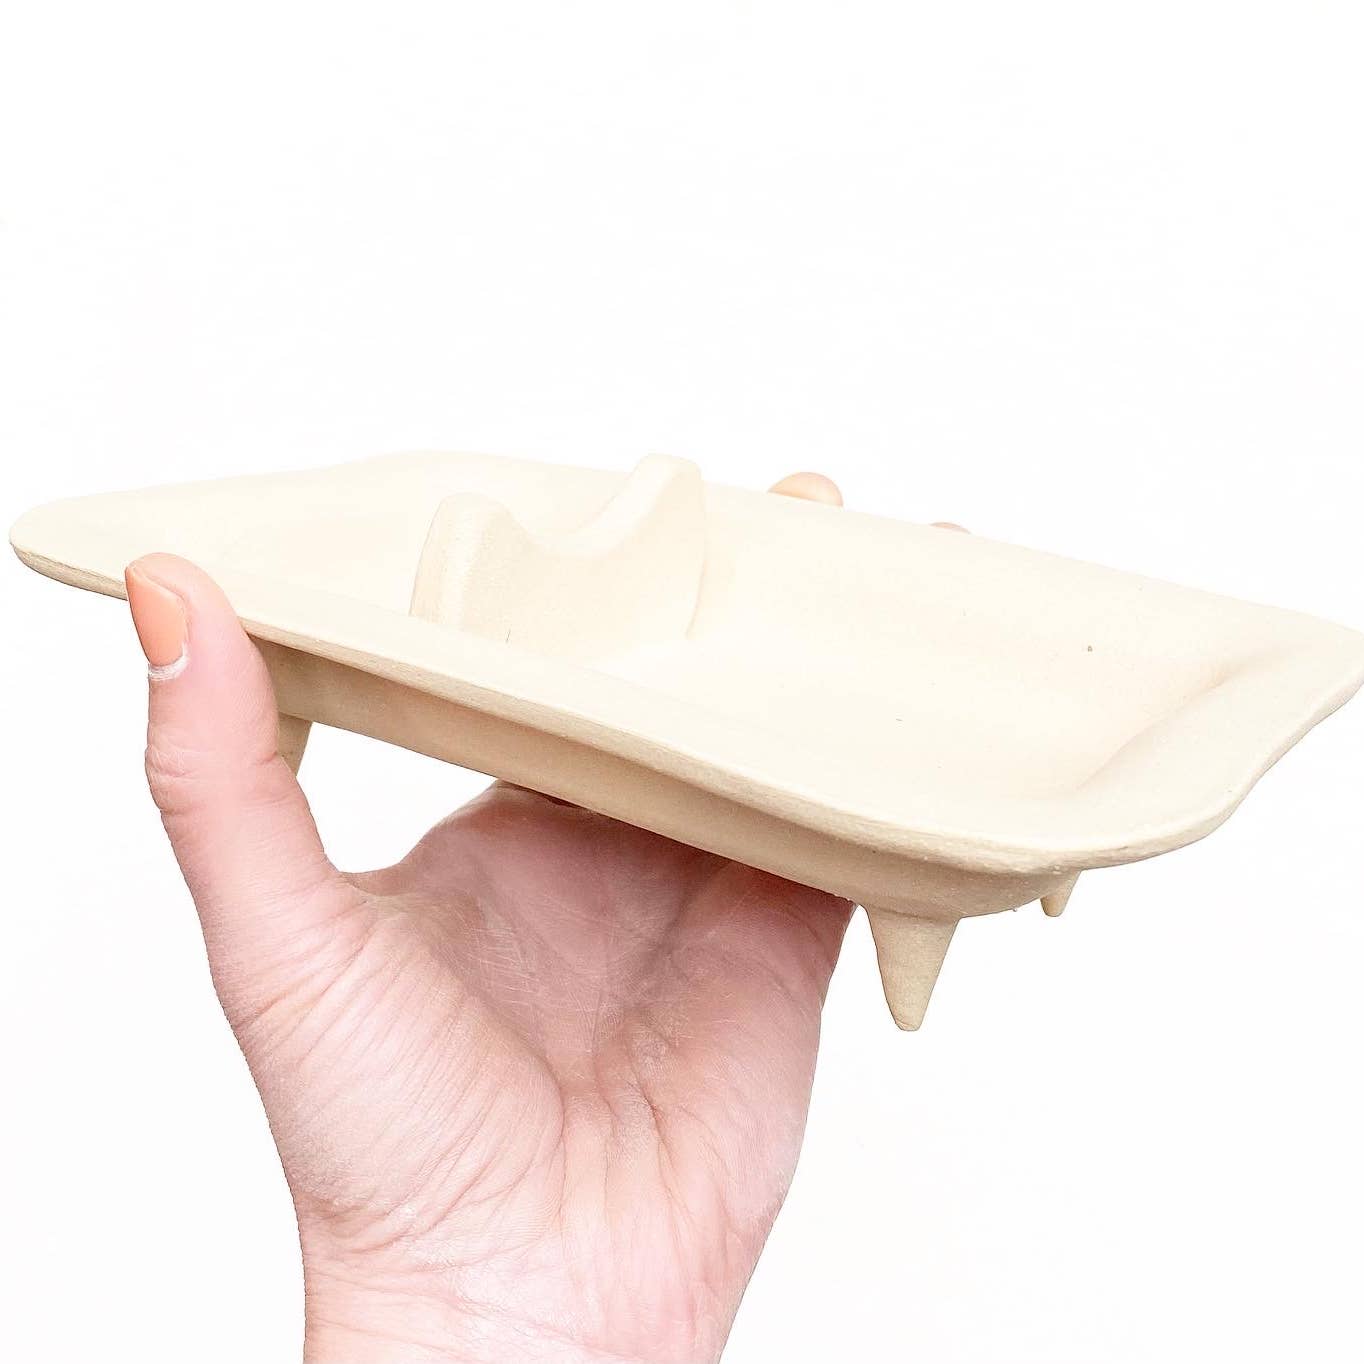 Hand built ceramic dish designed with a rest large enough for a smudge bundle, as well as a place for incense, too. Crafted from buff clay & made in Virginia, USA by Korai Ceramics.